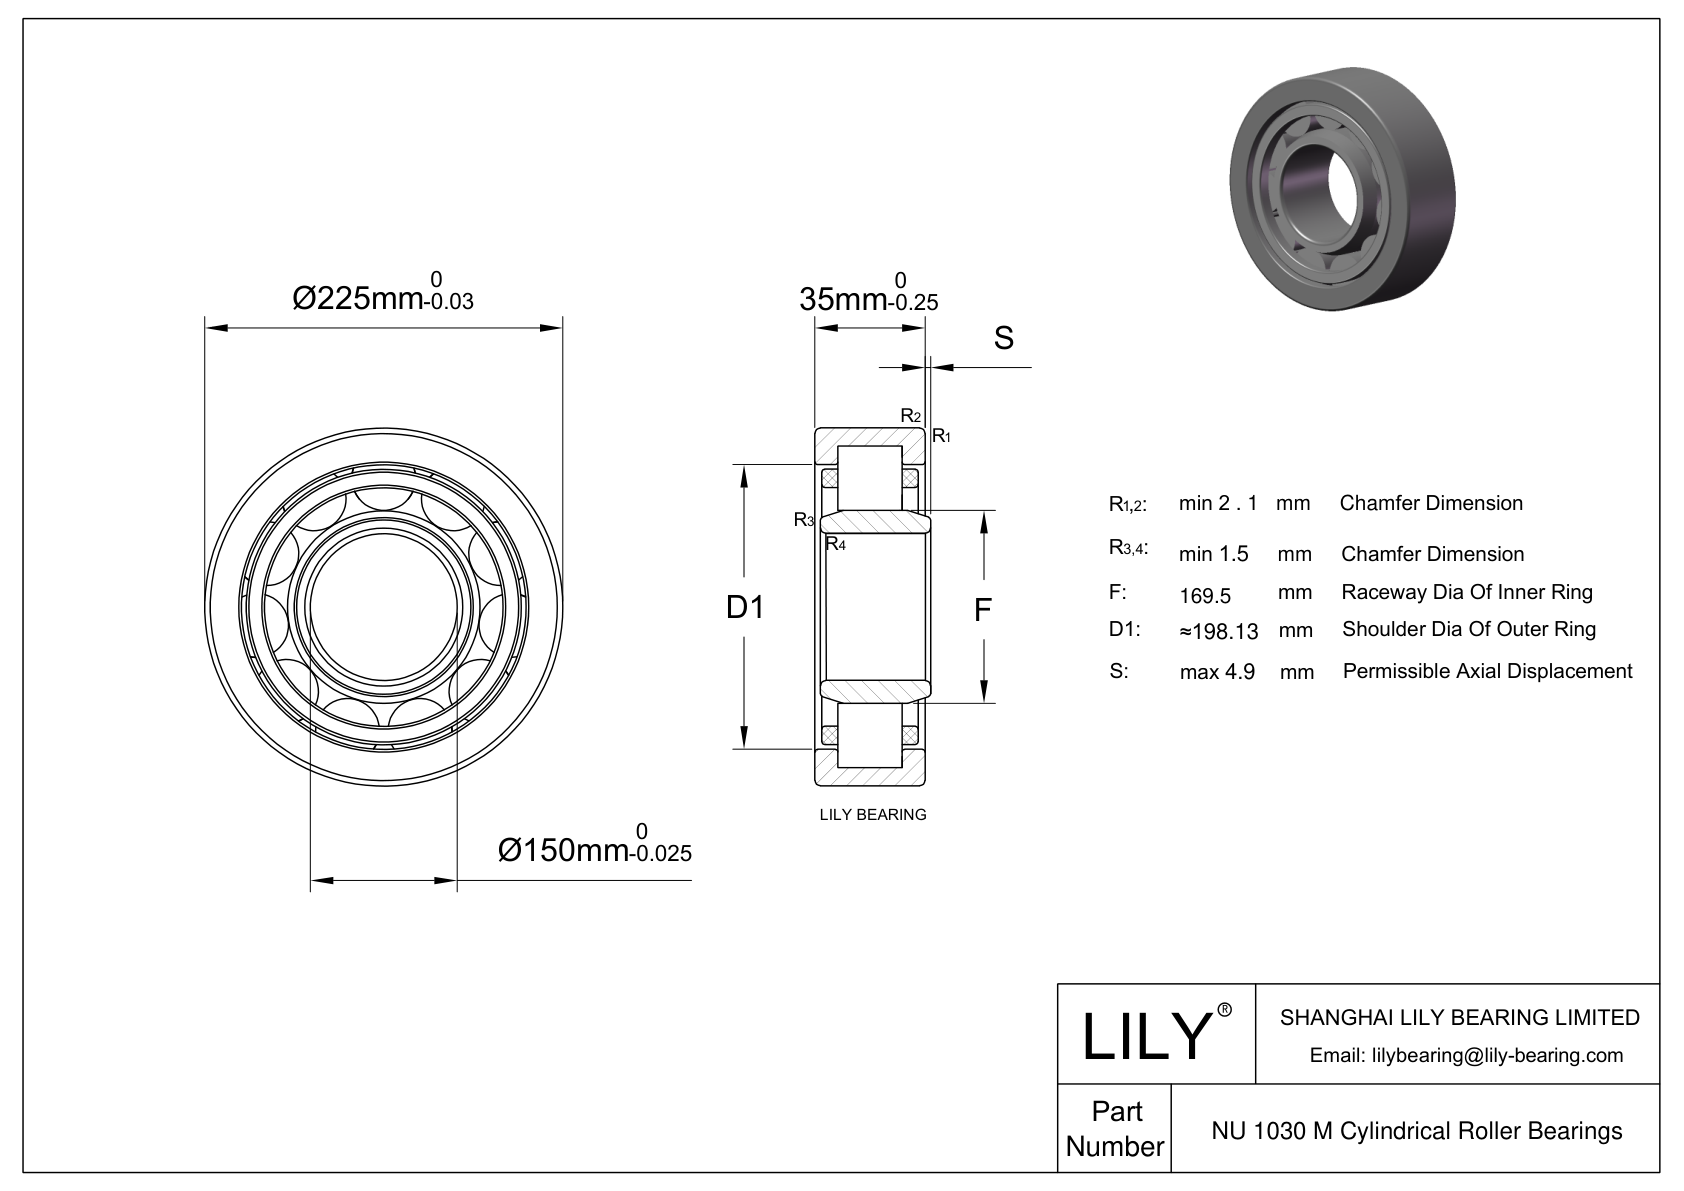 NU 1030 M/C3VL2071 Ceramic Coated Cylindrical Roller Bearings cad drawing